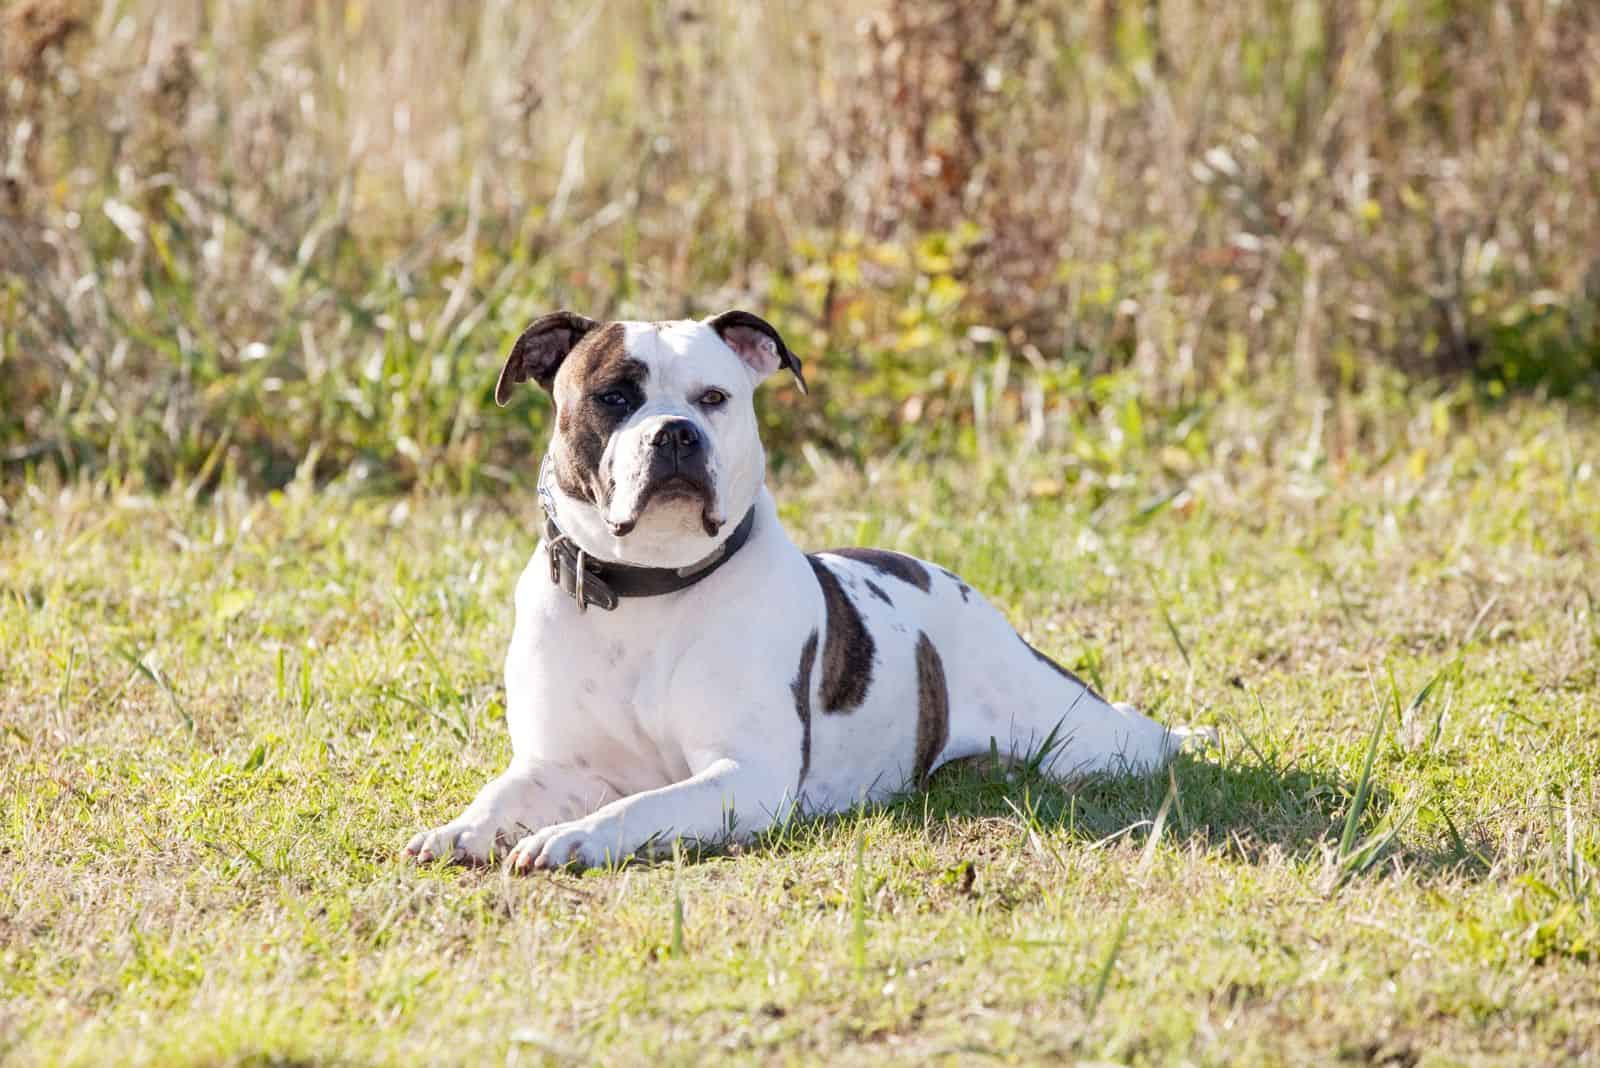 A white American Bulldog with brown spots sits in a field